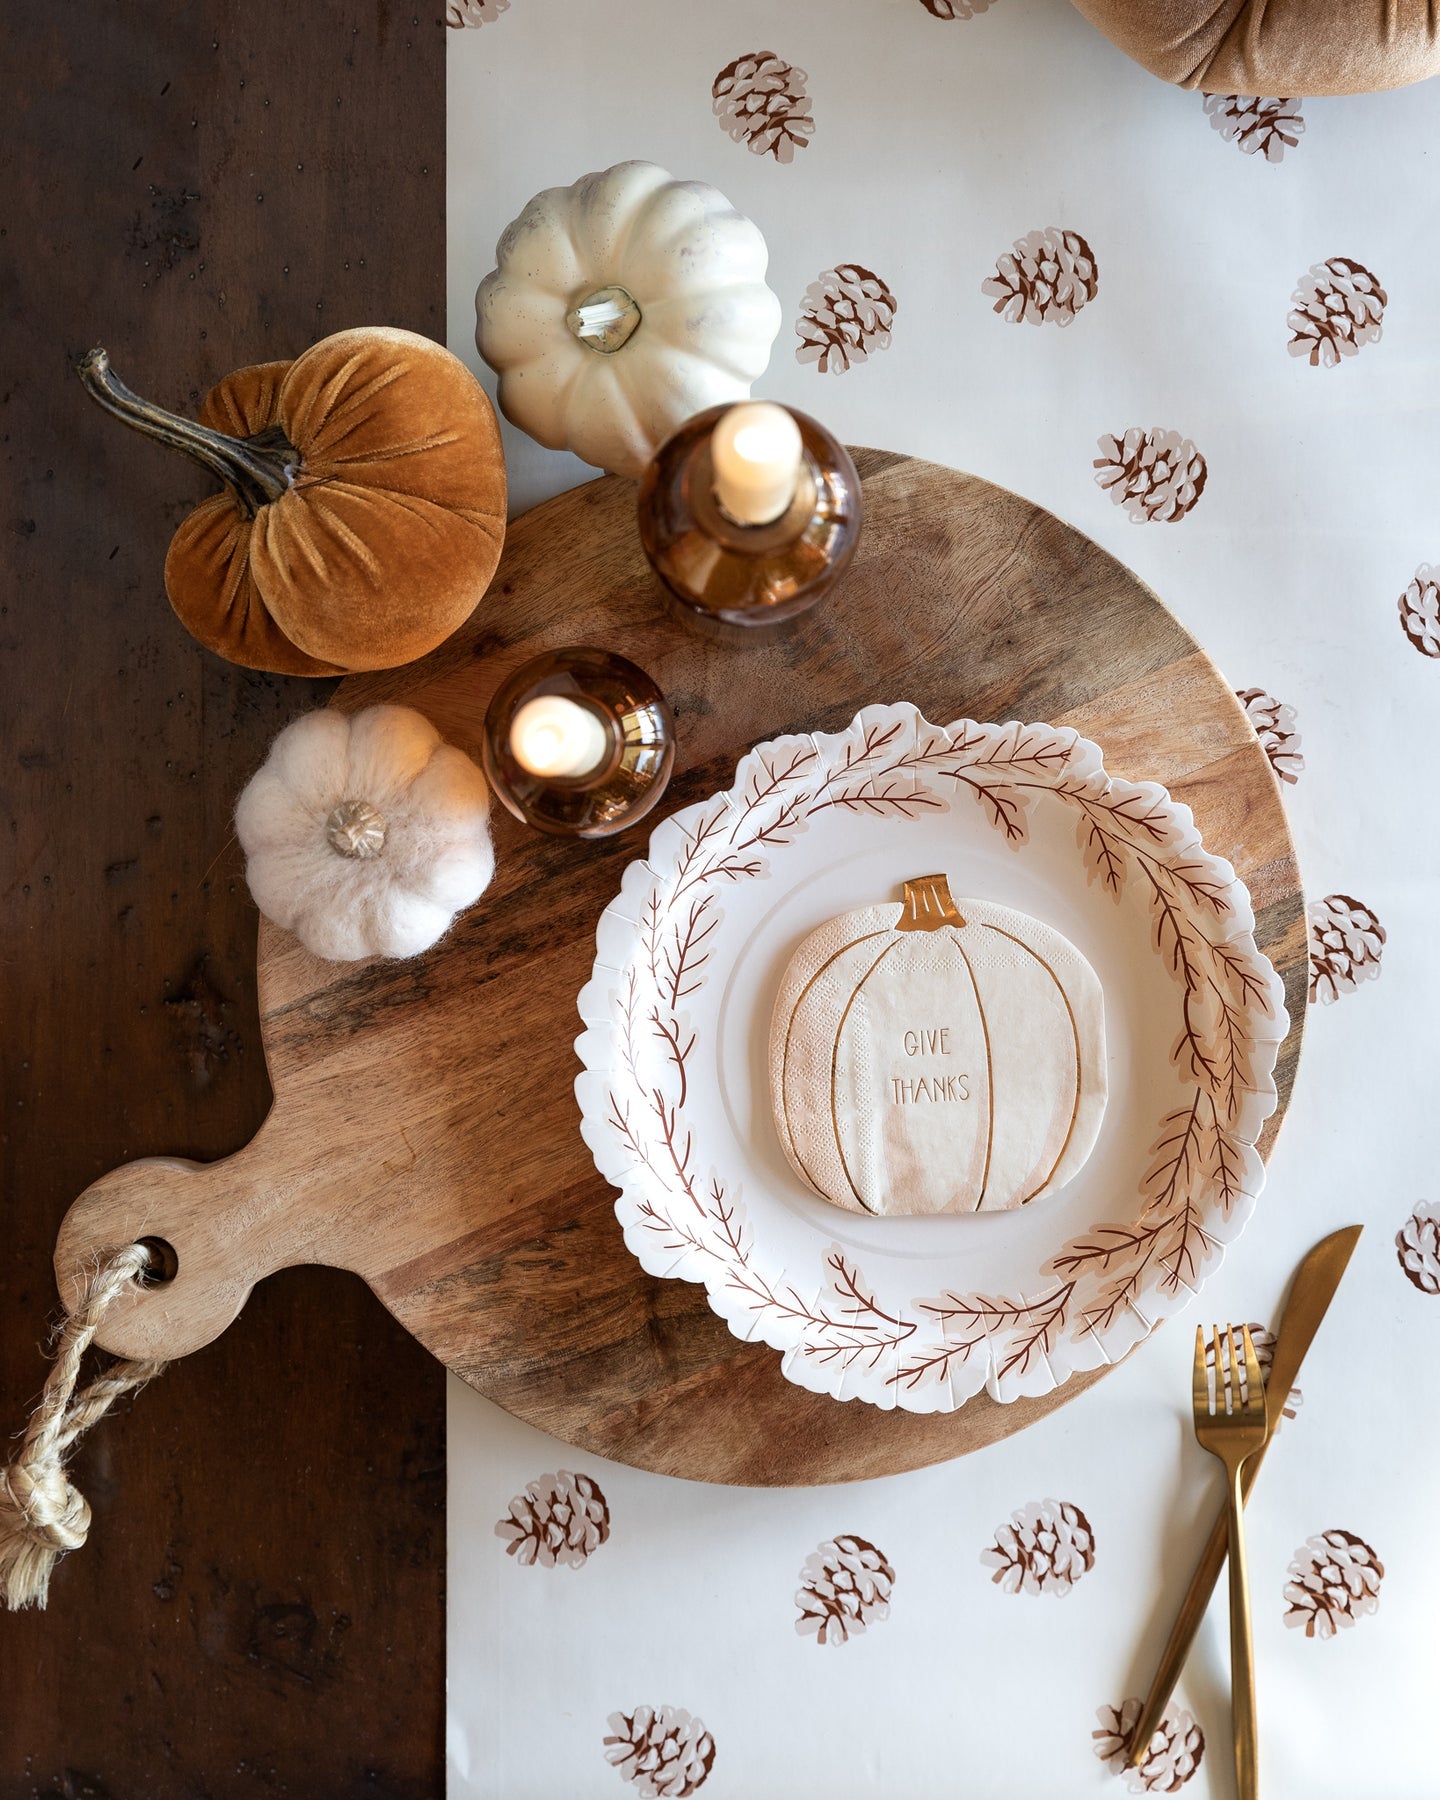 Set your Friendsgiving or Thanksgiving table with any of these warm harvest napkins.